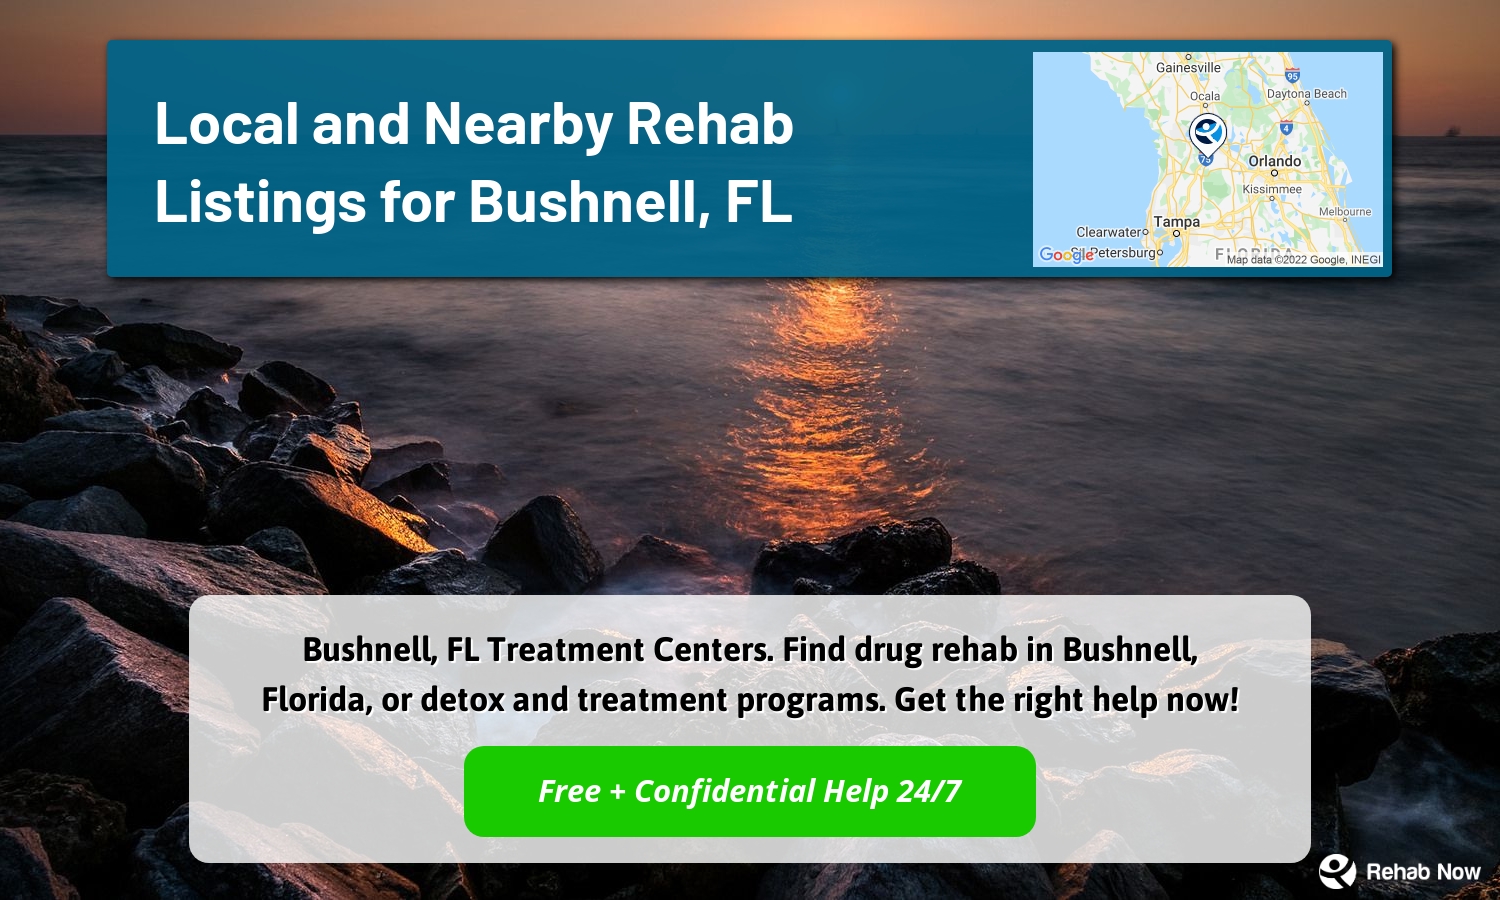 Bushnell, FL Treatment Centers. Find drug rehab in Bushnell, Florida, or detox and treatment programs. Get the right help now!